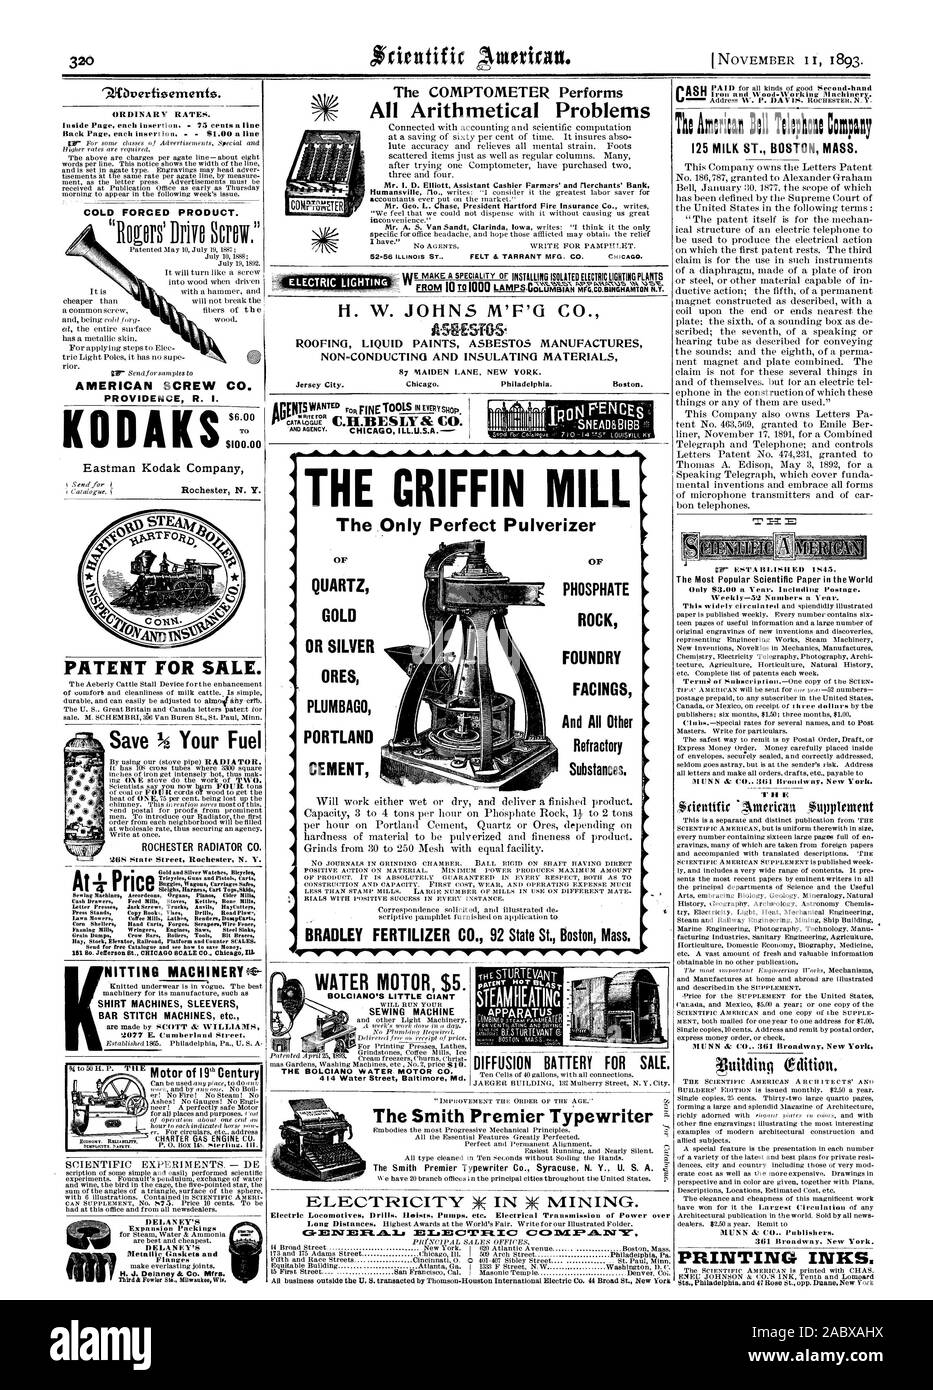 KODAKS PATENT FOR SALE. Save Your Fuel ROCHESTER RADIATOR CO. 26S State Street Rochester N. Y. Gold and Silver Watches Bicycles Buggies Wagons Carriages Safes Sleighs Harness Cart TopsSkids Sewing Machines Accordeons Organs Pianos Cider Mills Cash Drawers Feed Mills Stoves Kettles Bone Mills Letter Presses Jack Screws Trucks Anvils Hayllutters Press Stands Copy Books Vises Drills Road Plow. Lawn Mos ere Coffee Mills Lathes BendersDumpearts Corn Shellers Hand torts Forges. ScrapersWire Fence Grain Dumps Crow Bars Boilers Tools Bit Braces Hay Stock Elevator Railroad Platform and Counter SCALES Stock Photo